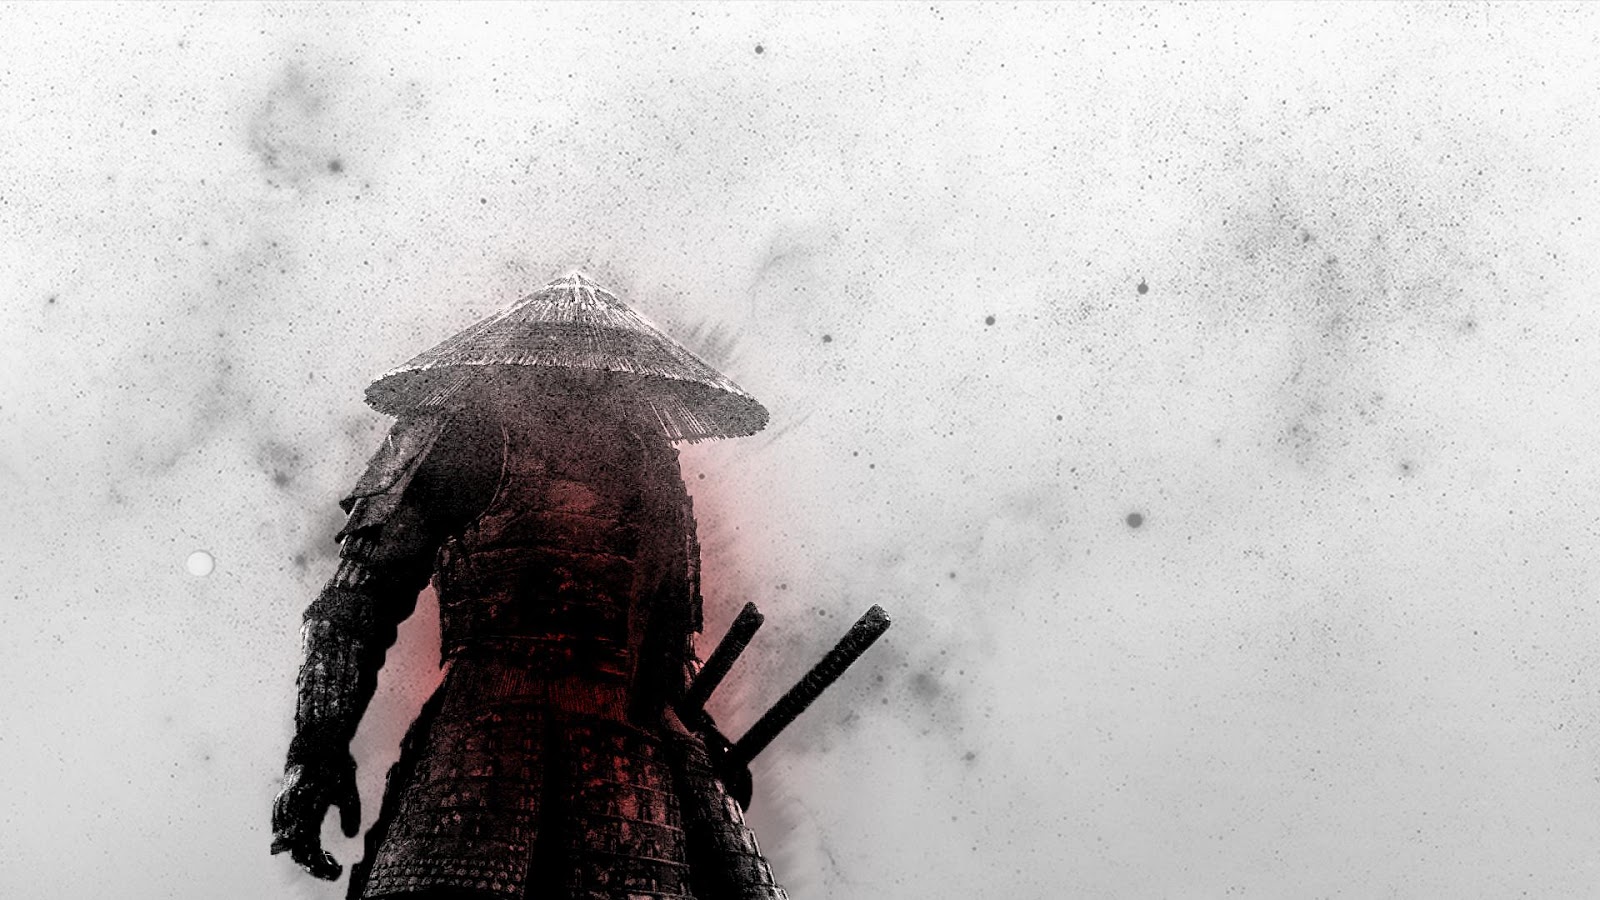 Samurai Pack 3 Live Wallpaper - Android Apps on Google Play